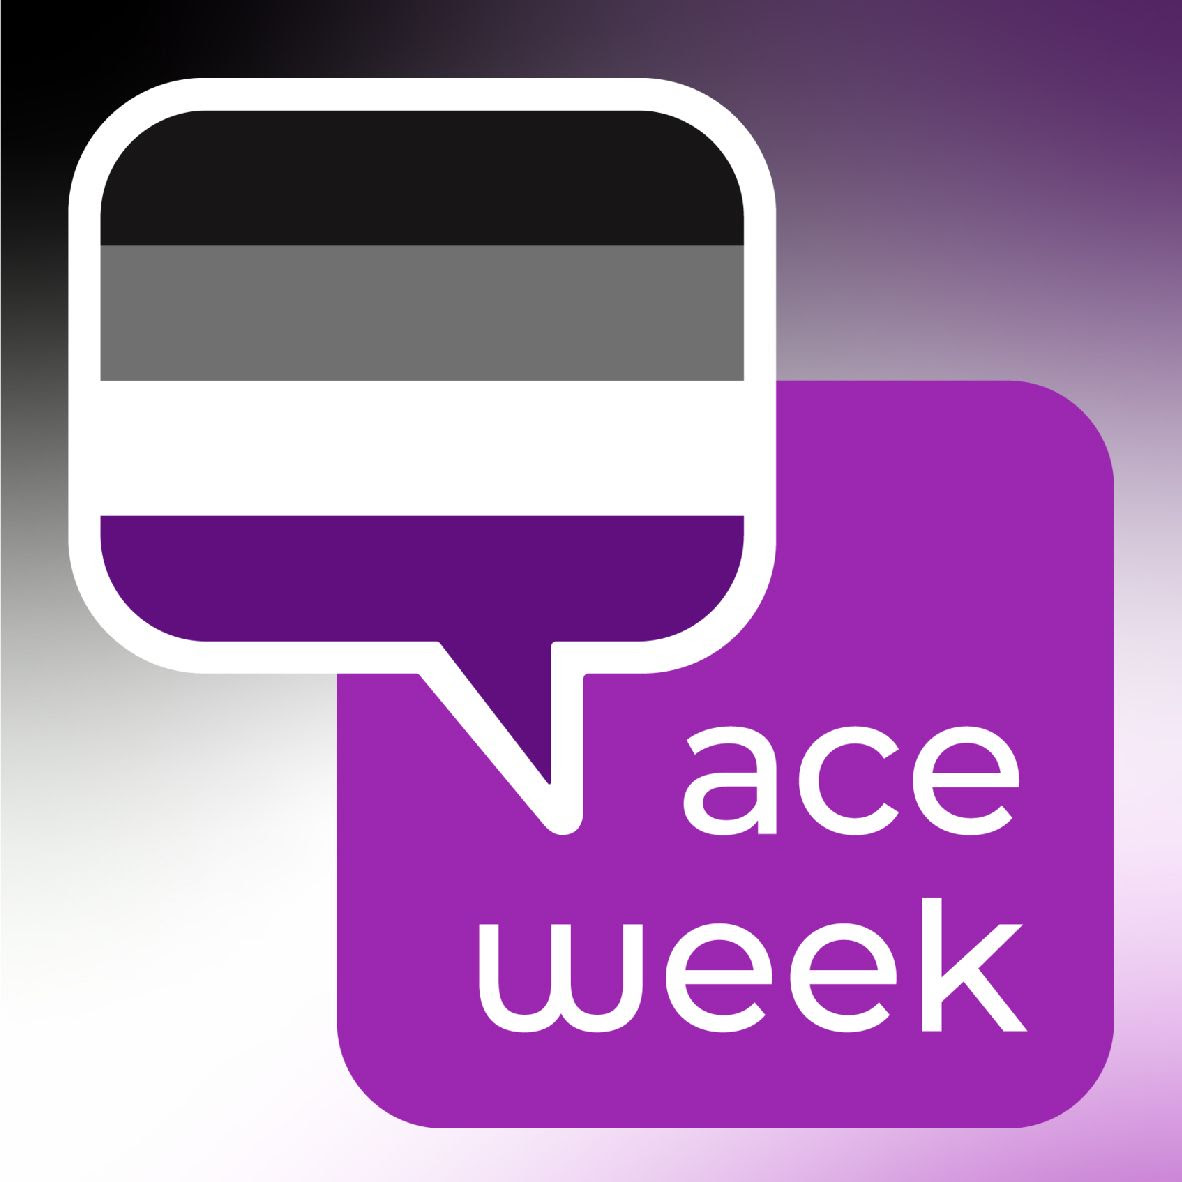 Ace Week logo with ace pride flag